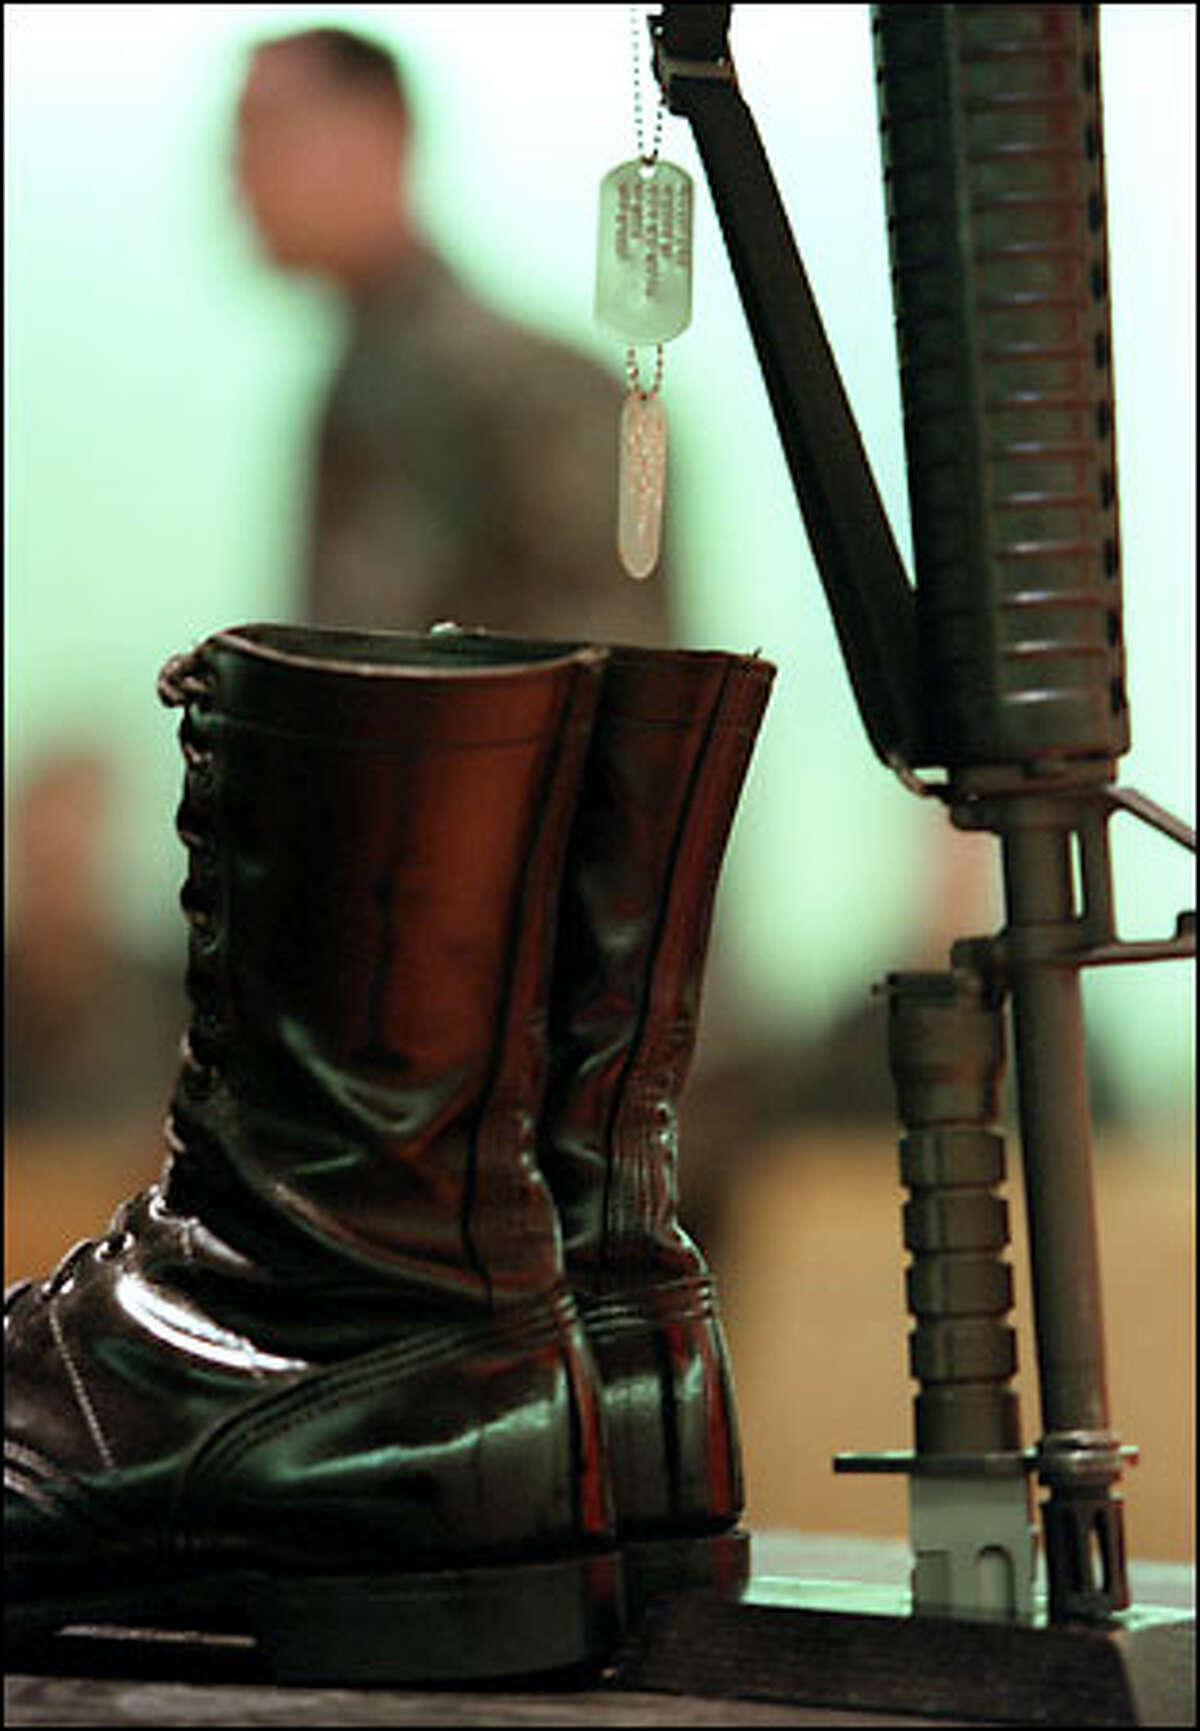 Inside the Soldiers' Chapel at Fort Lewis, the symbolic boots, dog tags and inverted rifle with helmet form the centerpiece at a memorial yesterday for 29-year-old Army Spc. specialist Jason Wildfong, who was one of six military observers, including five Americans, killed by friendly fire during a training accident in Kuwait on Monday.